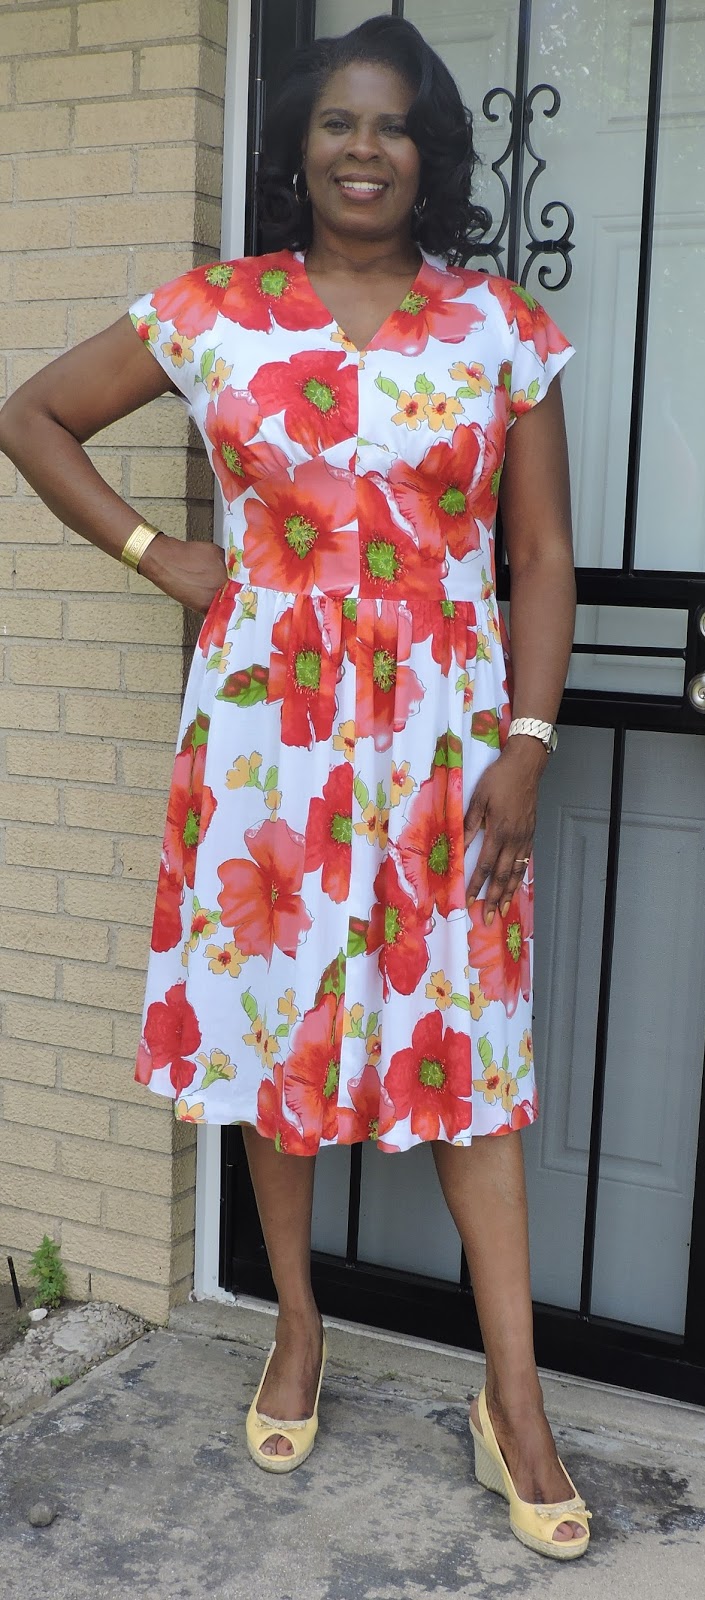 The Mahogany Stylist: Butterick 5209 - First Summer Dress of 2016